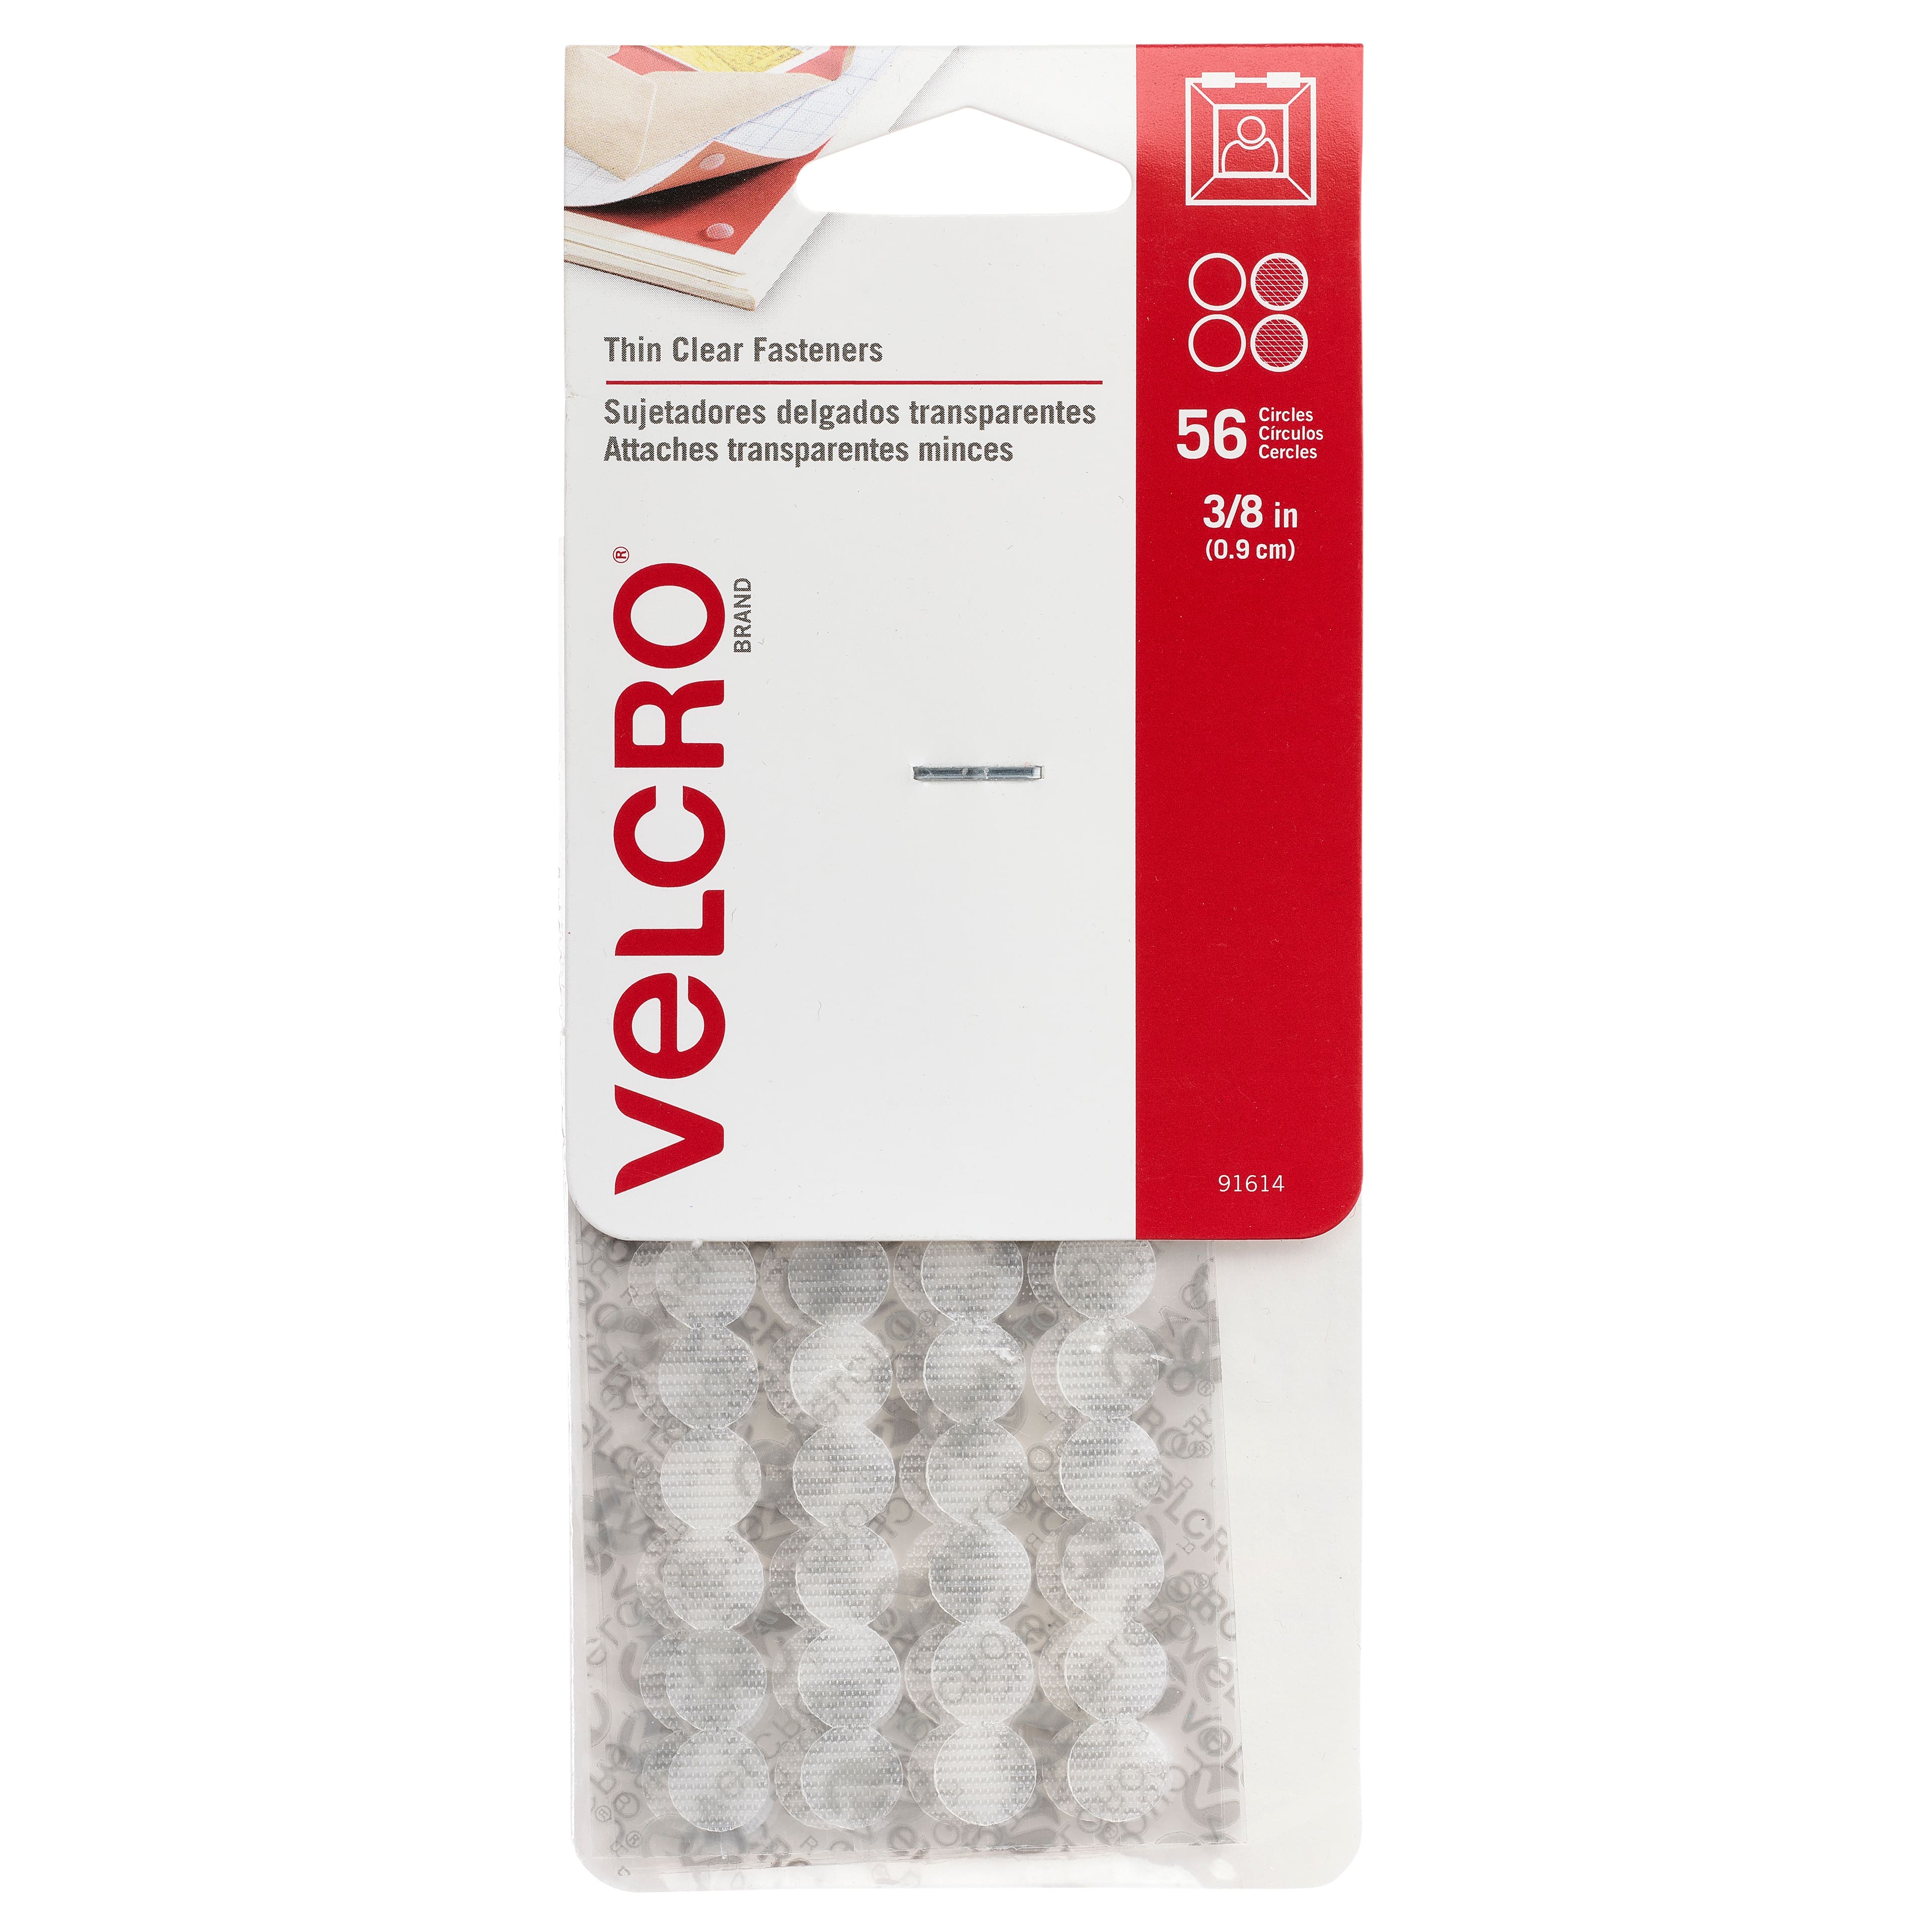 12 Packs: 56 ct. (672 total) VELCRO&#xAE; Brand Thin Clear Fasteners